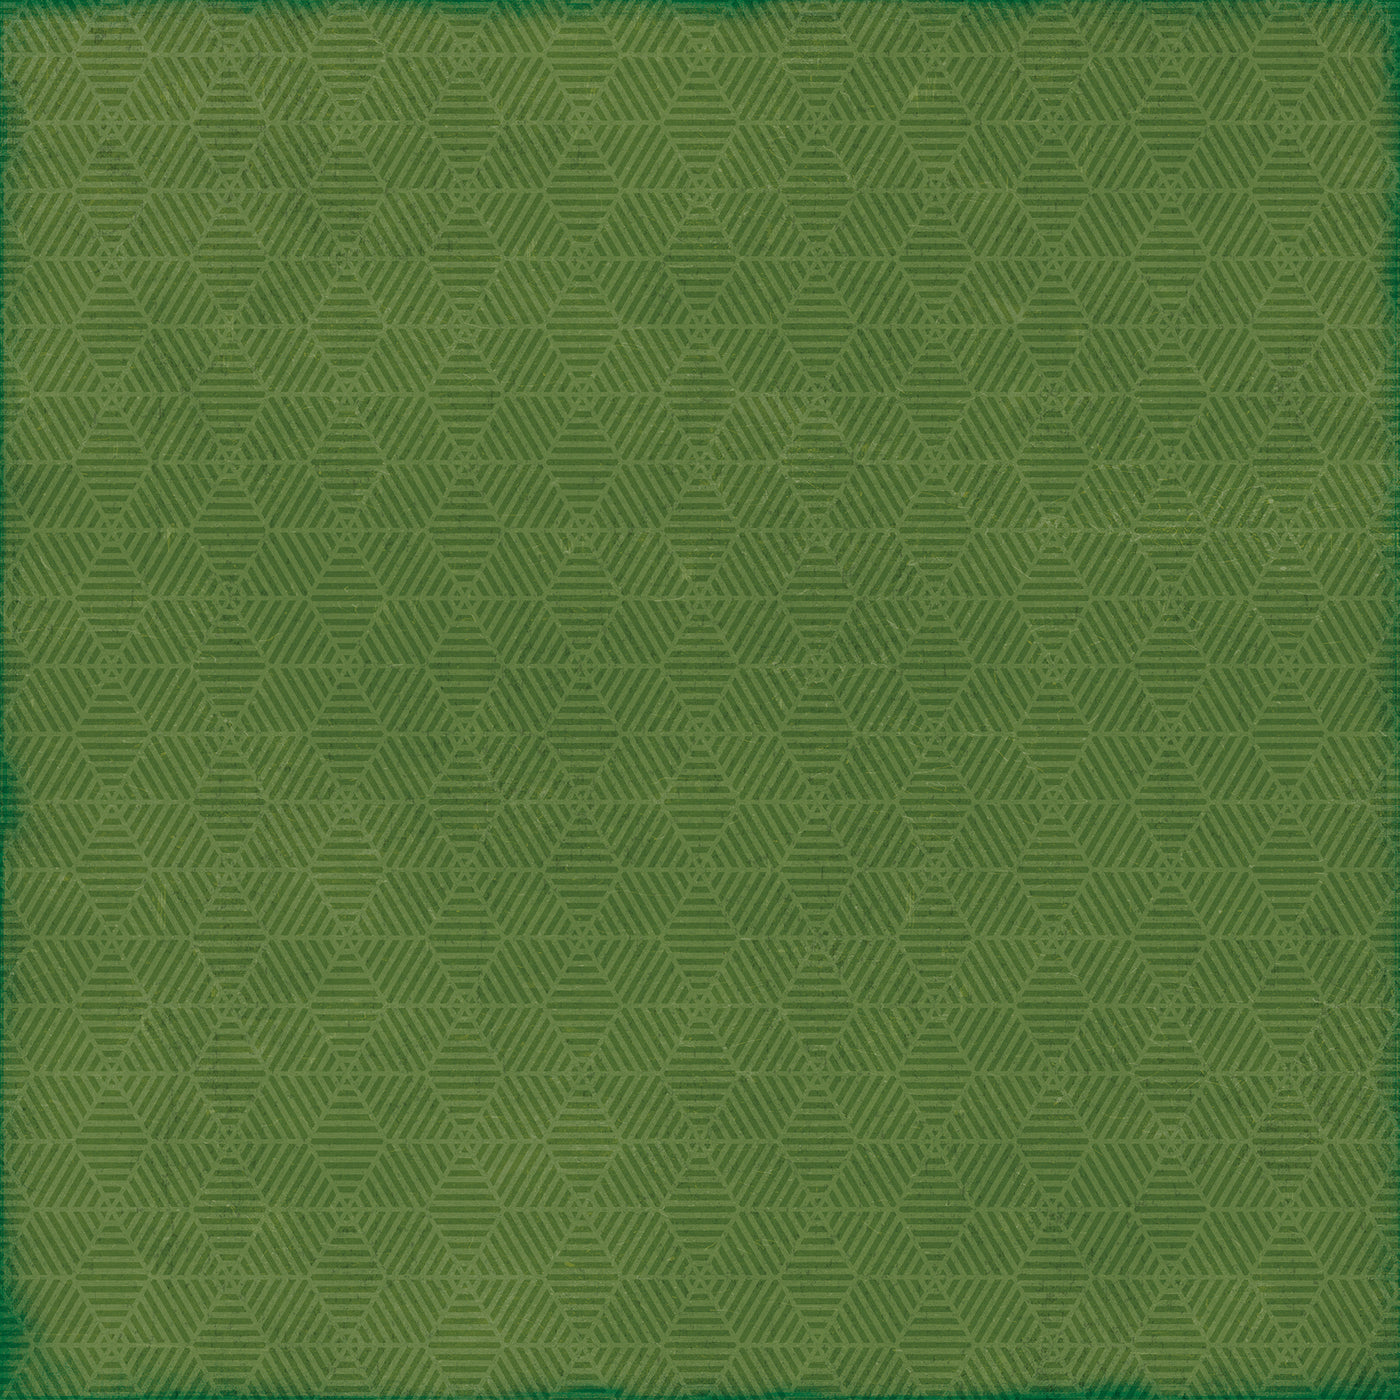 Side B - light green quilted abstract pattern on a green background